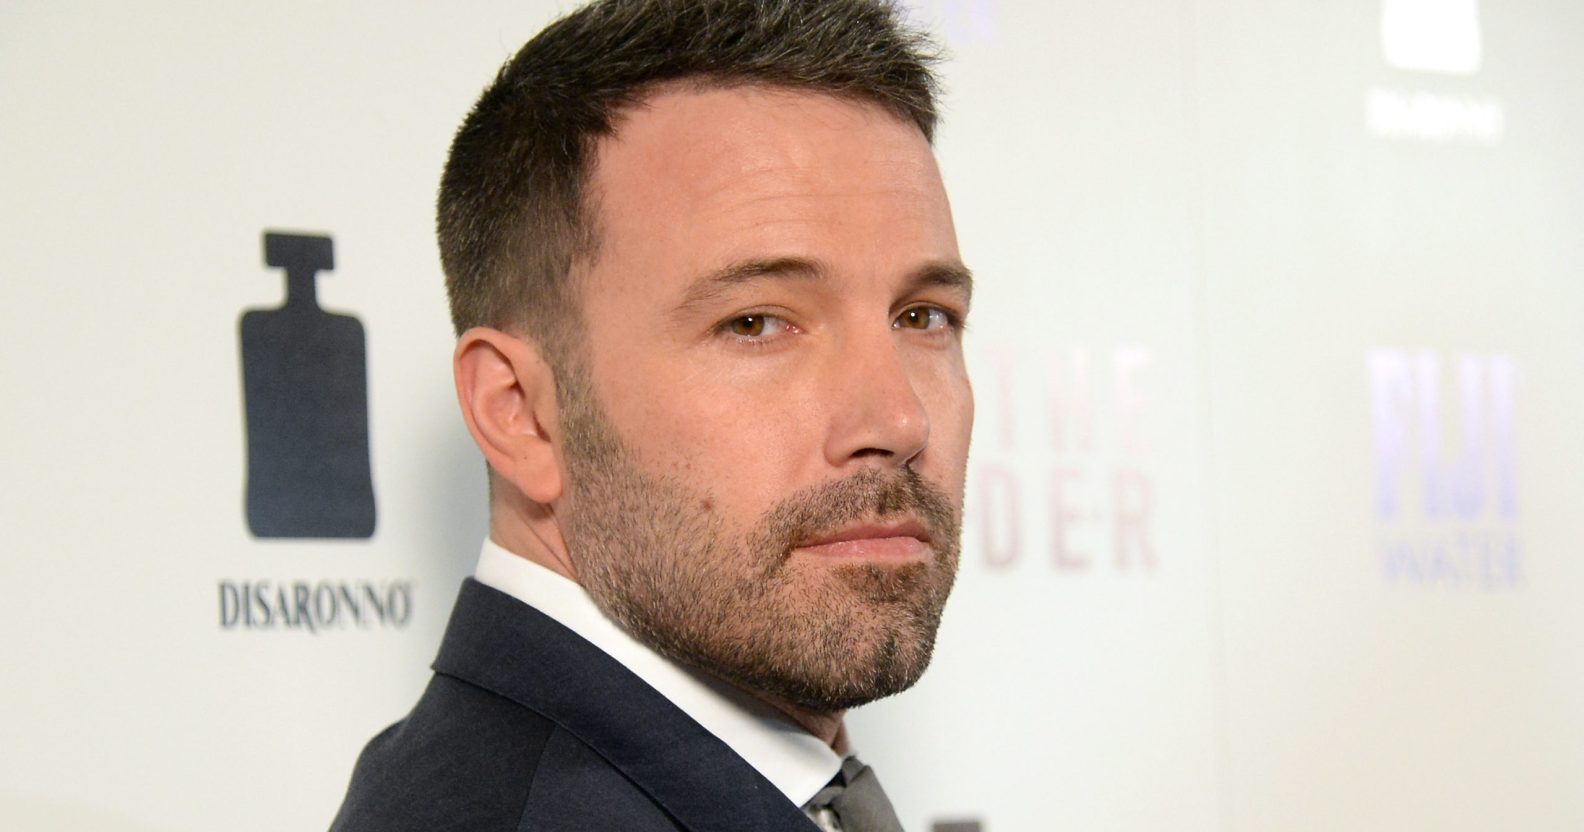 Ben Affleck really wants you to know he's not on Grindr for some reason